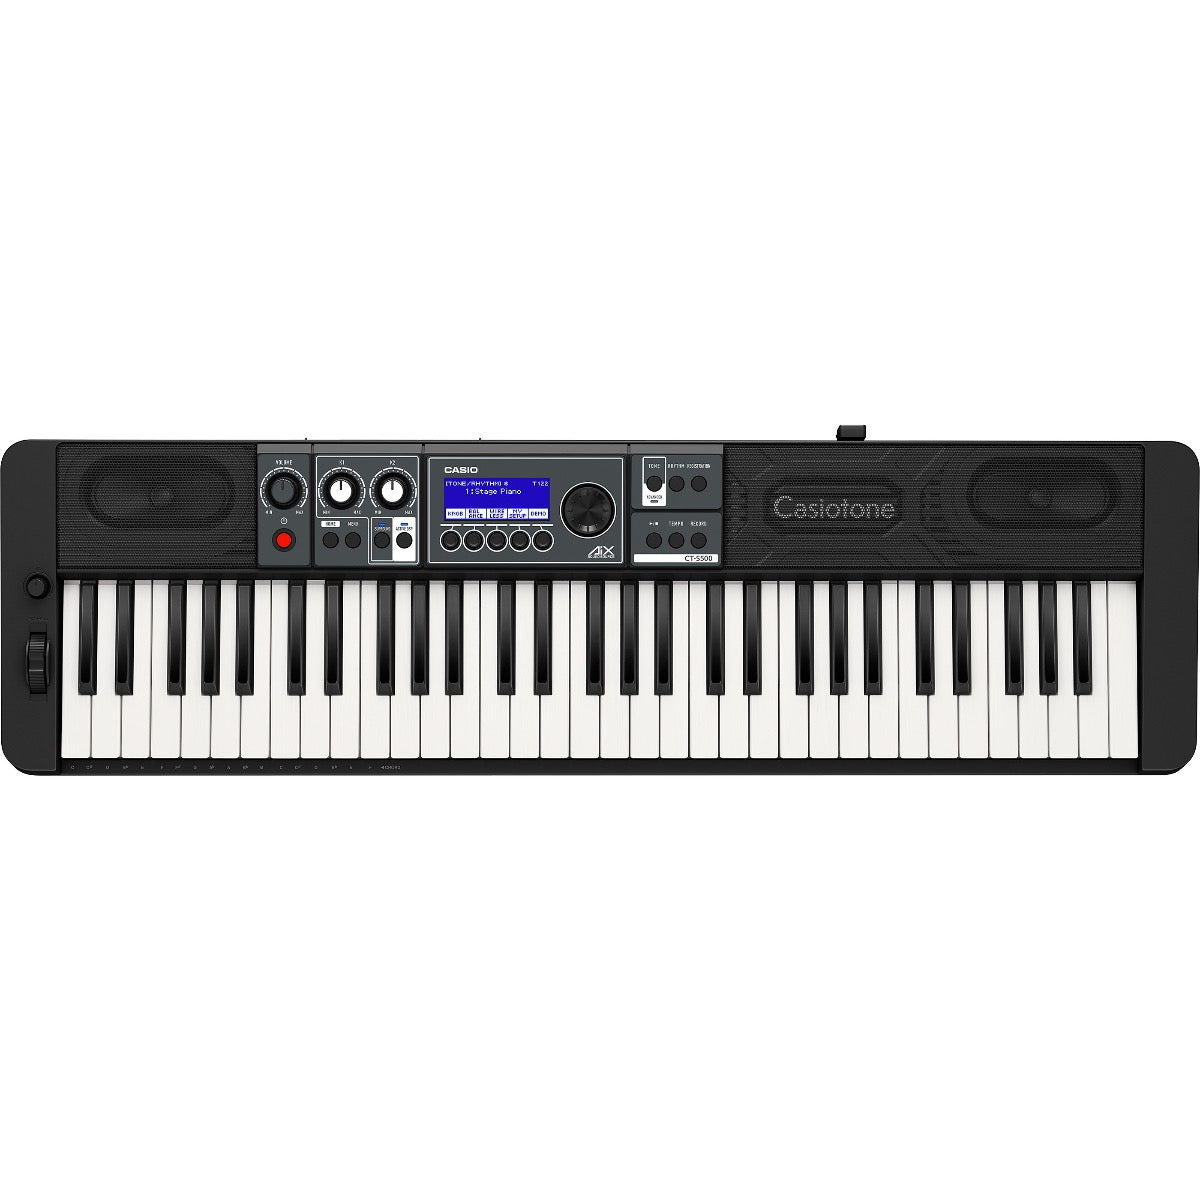 Casio Casiotone CT-S500 Portable Keyboard View 5